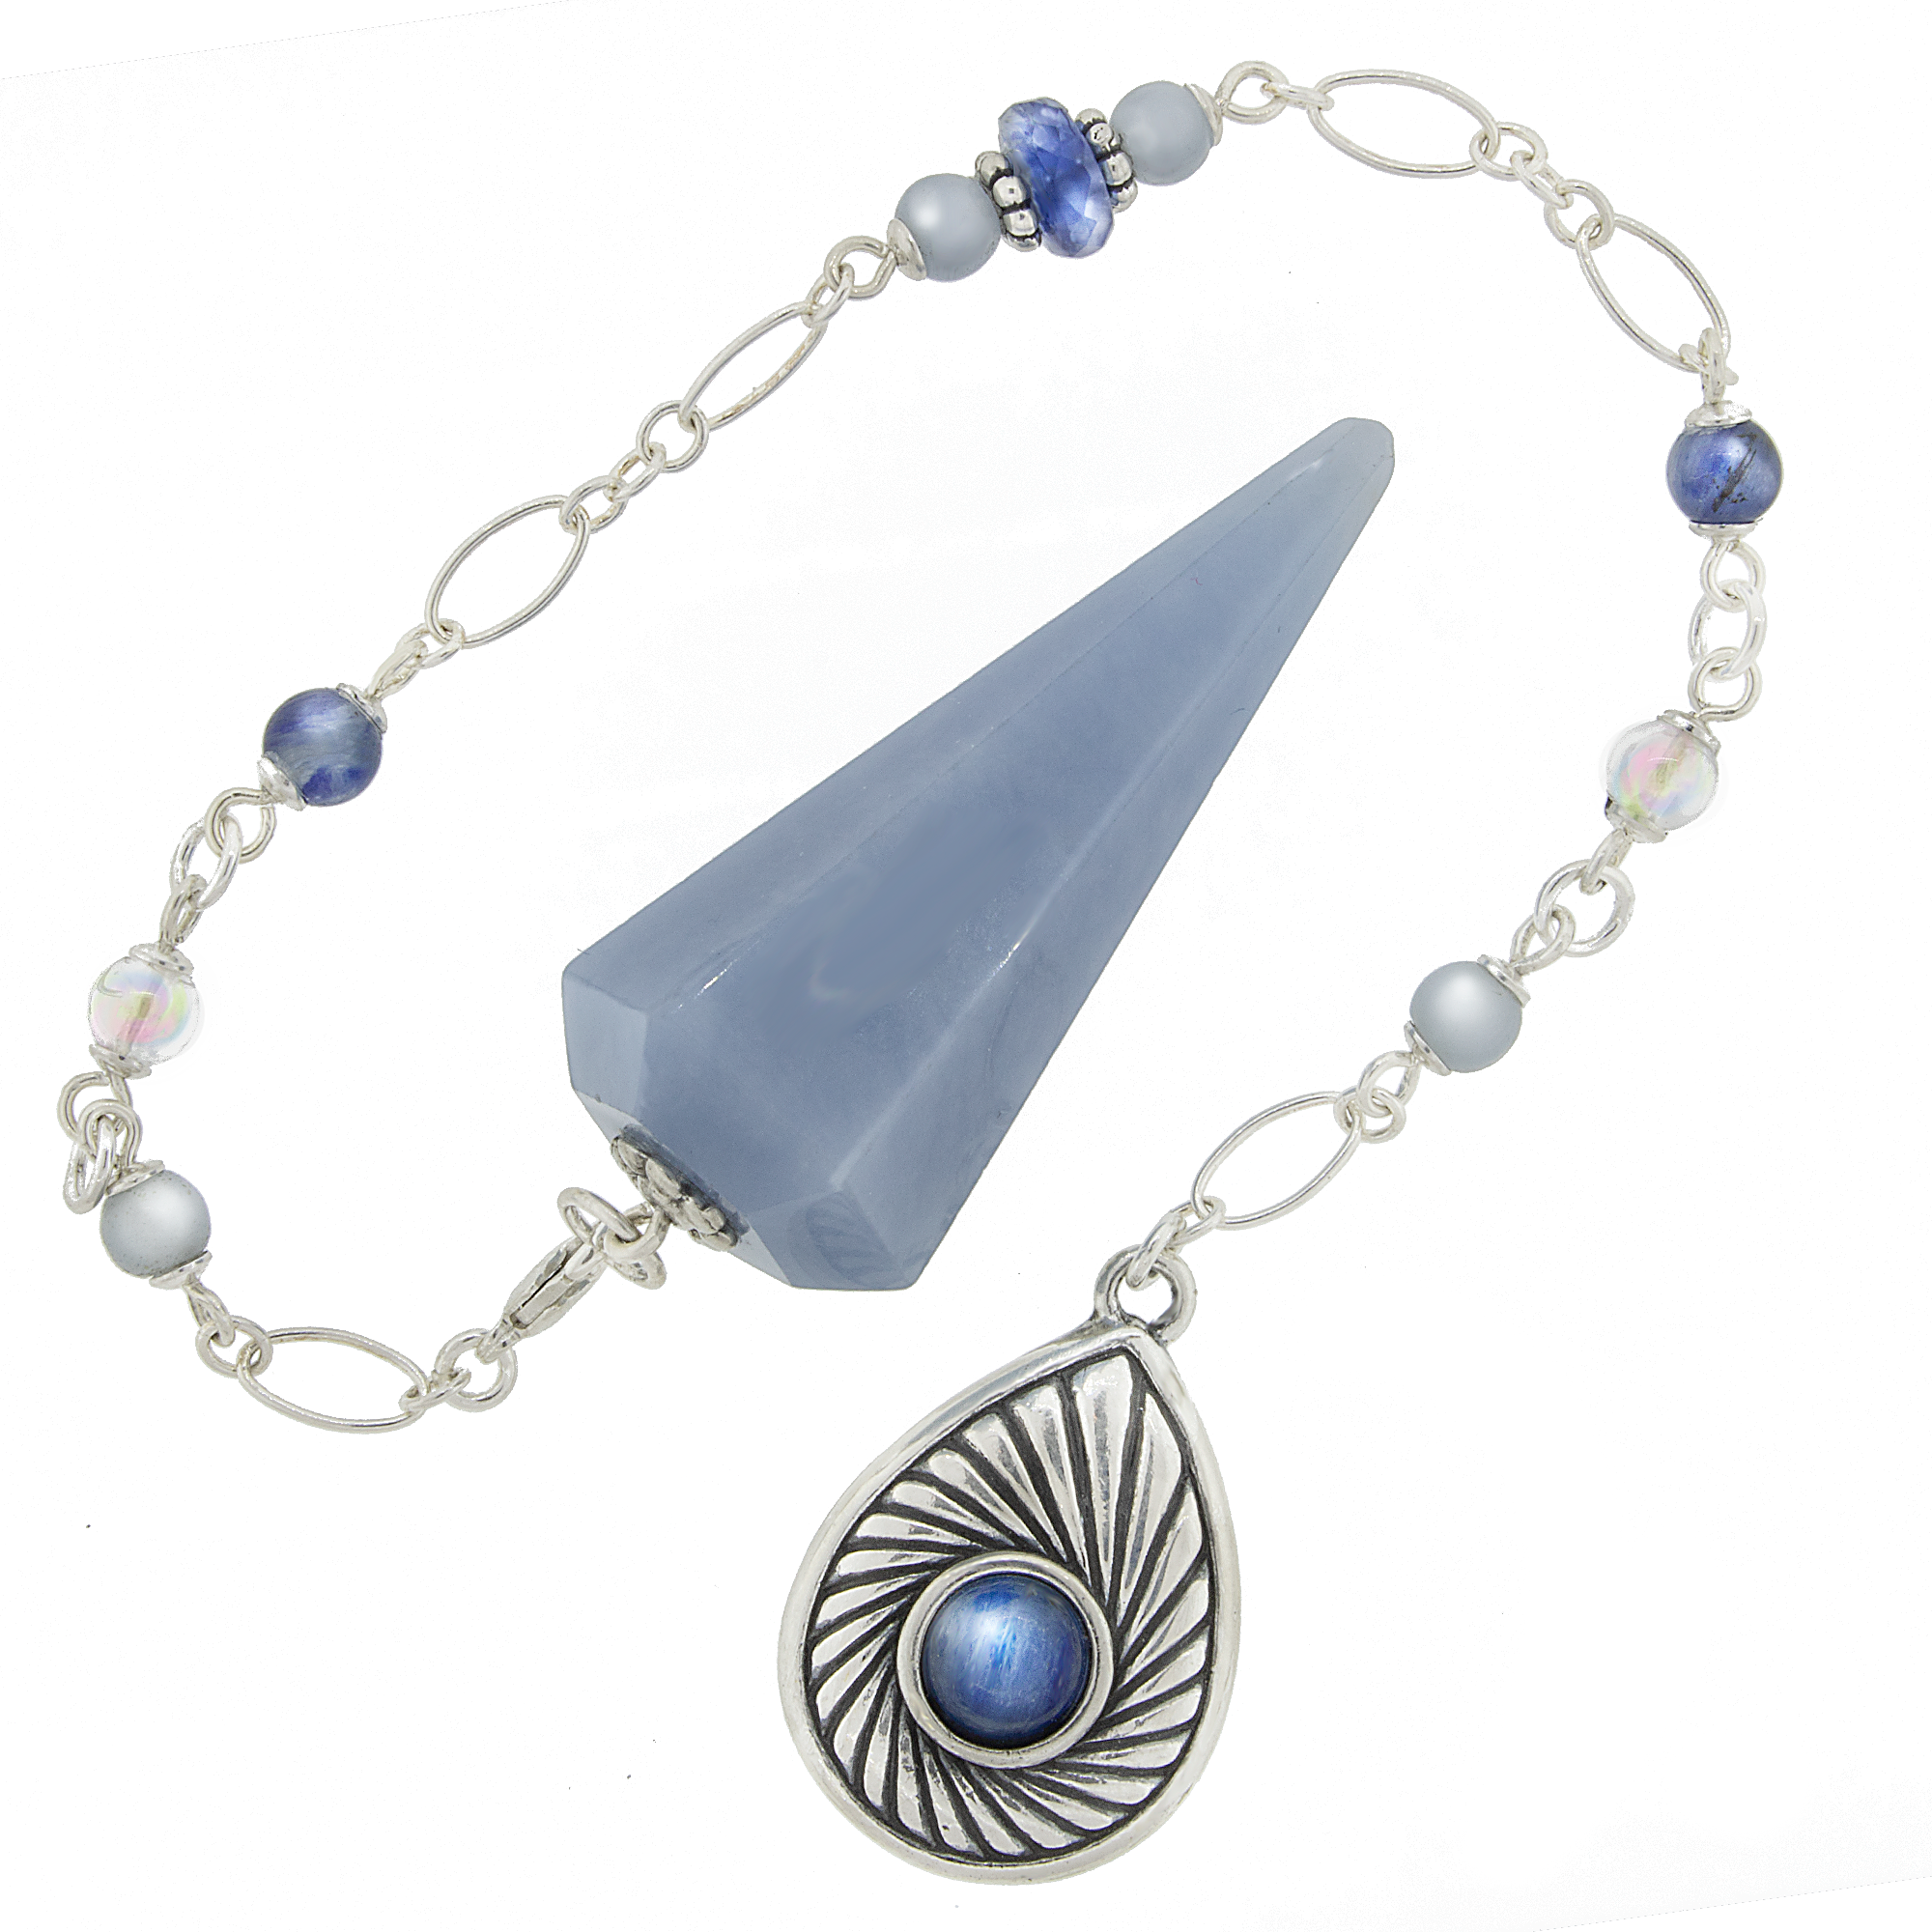 One of a Kind #345 - Angelite, Kyanite, Angel Aura and Sterling Silver Pendulum